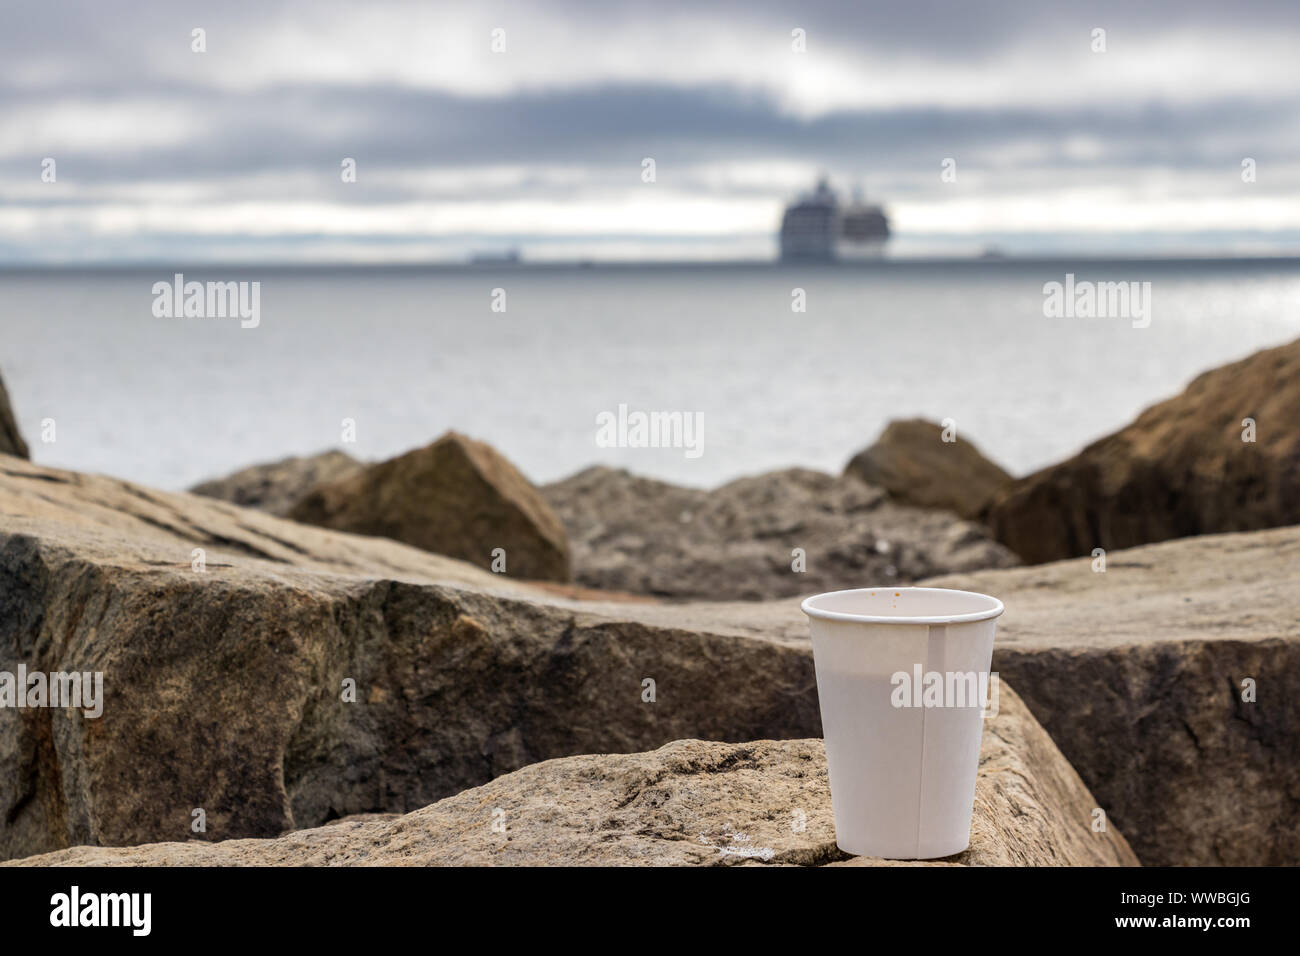 https://c8.alamy.com/comp/WWBGJG/cardboard-paper-cup-of-coffee-placed-on-the-stones-of-a-jetty-in-nome-alaska-WWBGJG.jpg